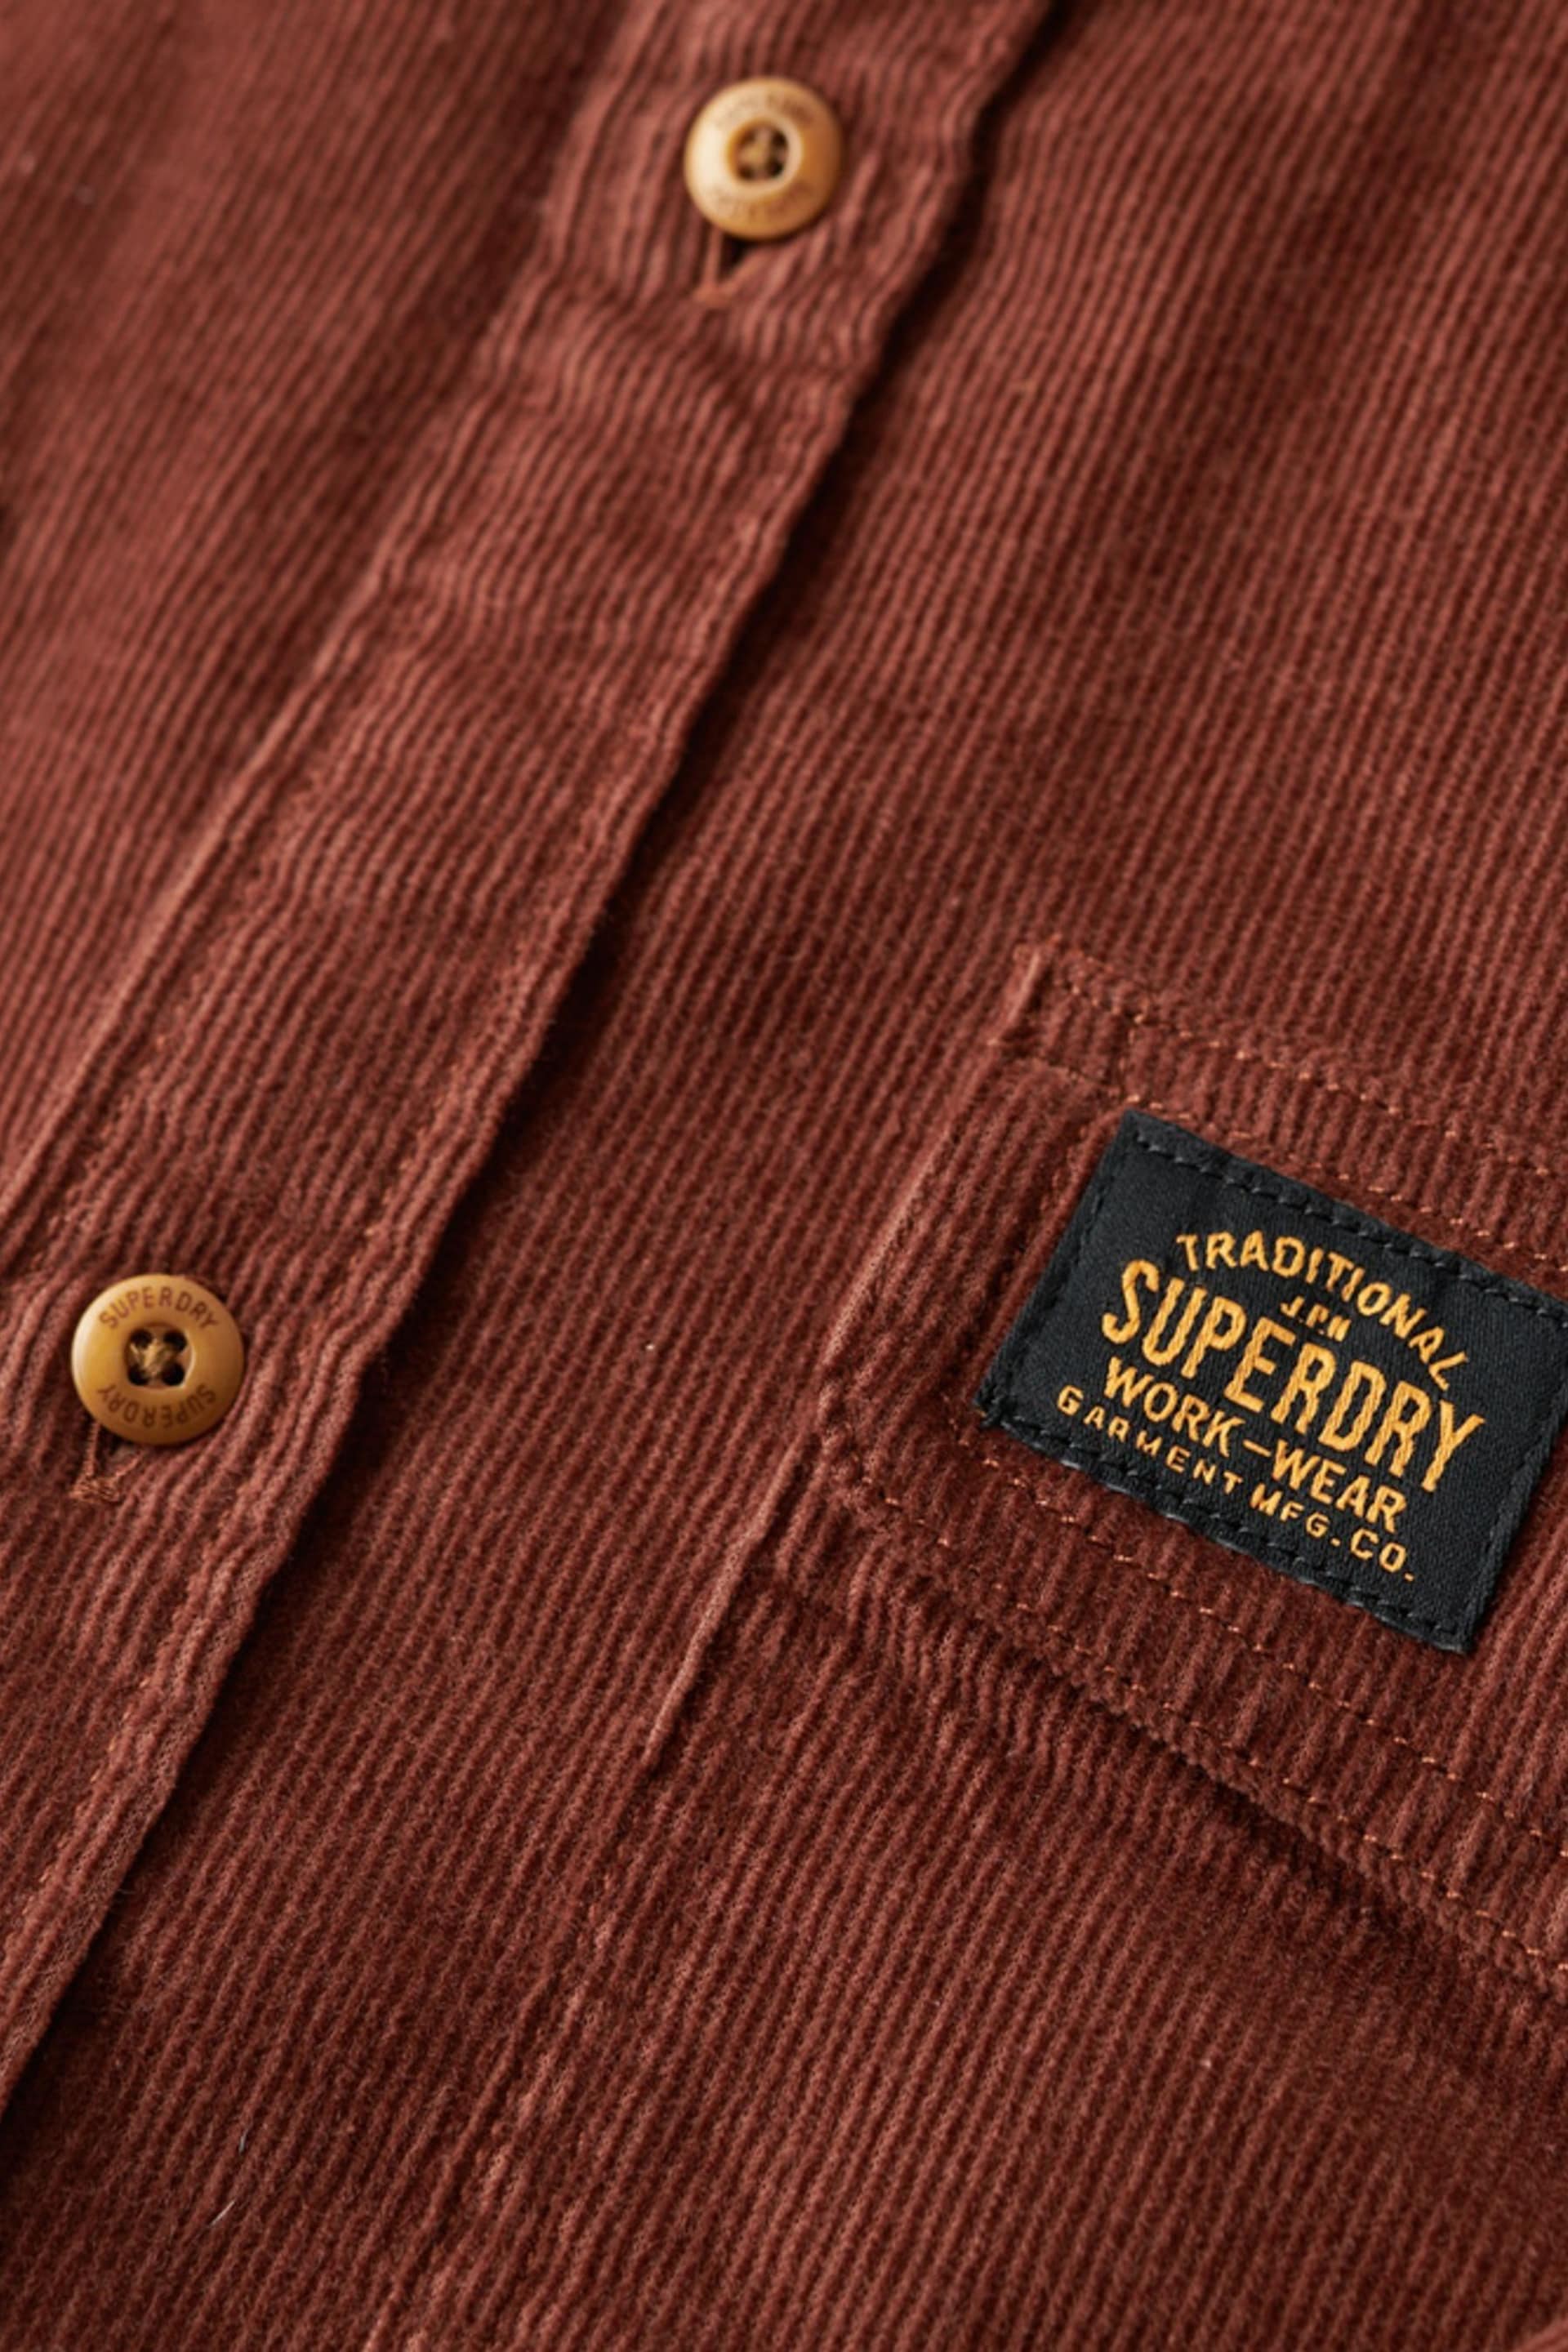 Superdry Brown Trailsman Cord Shirt - Image 4 of 5